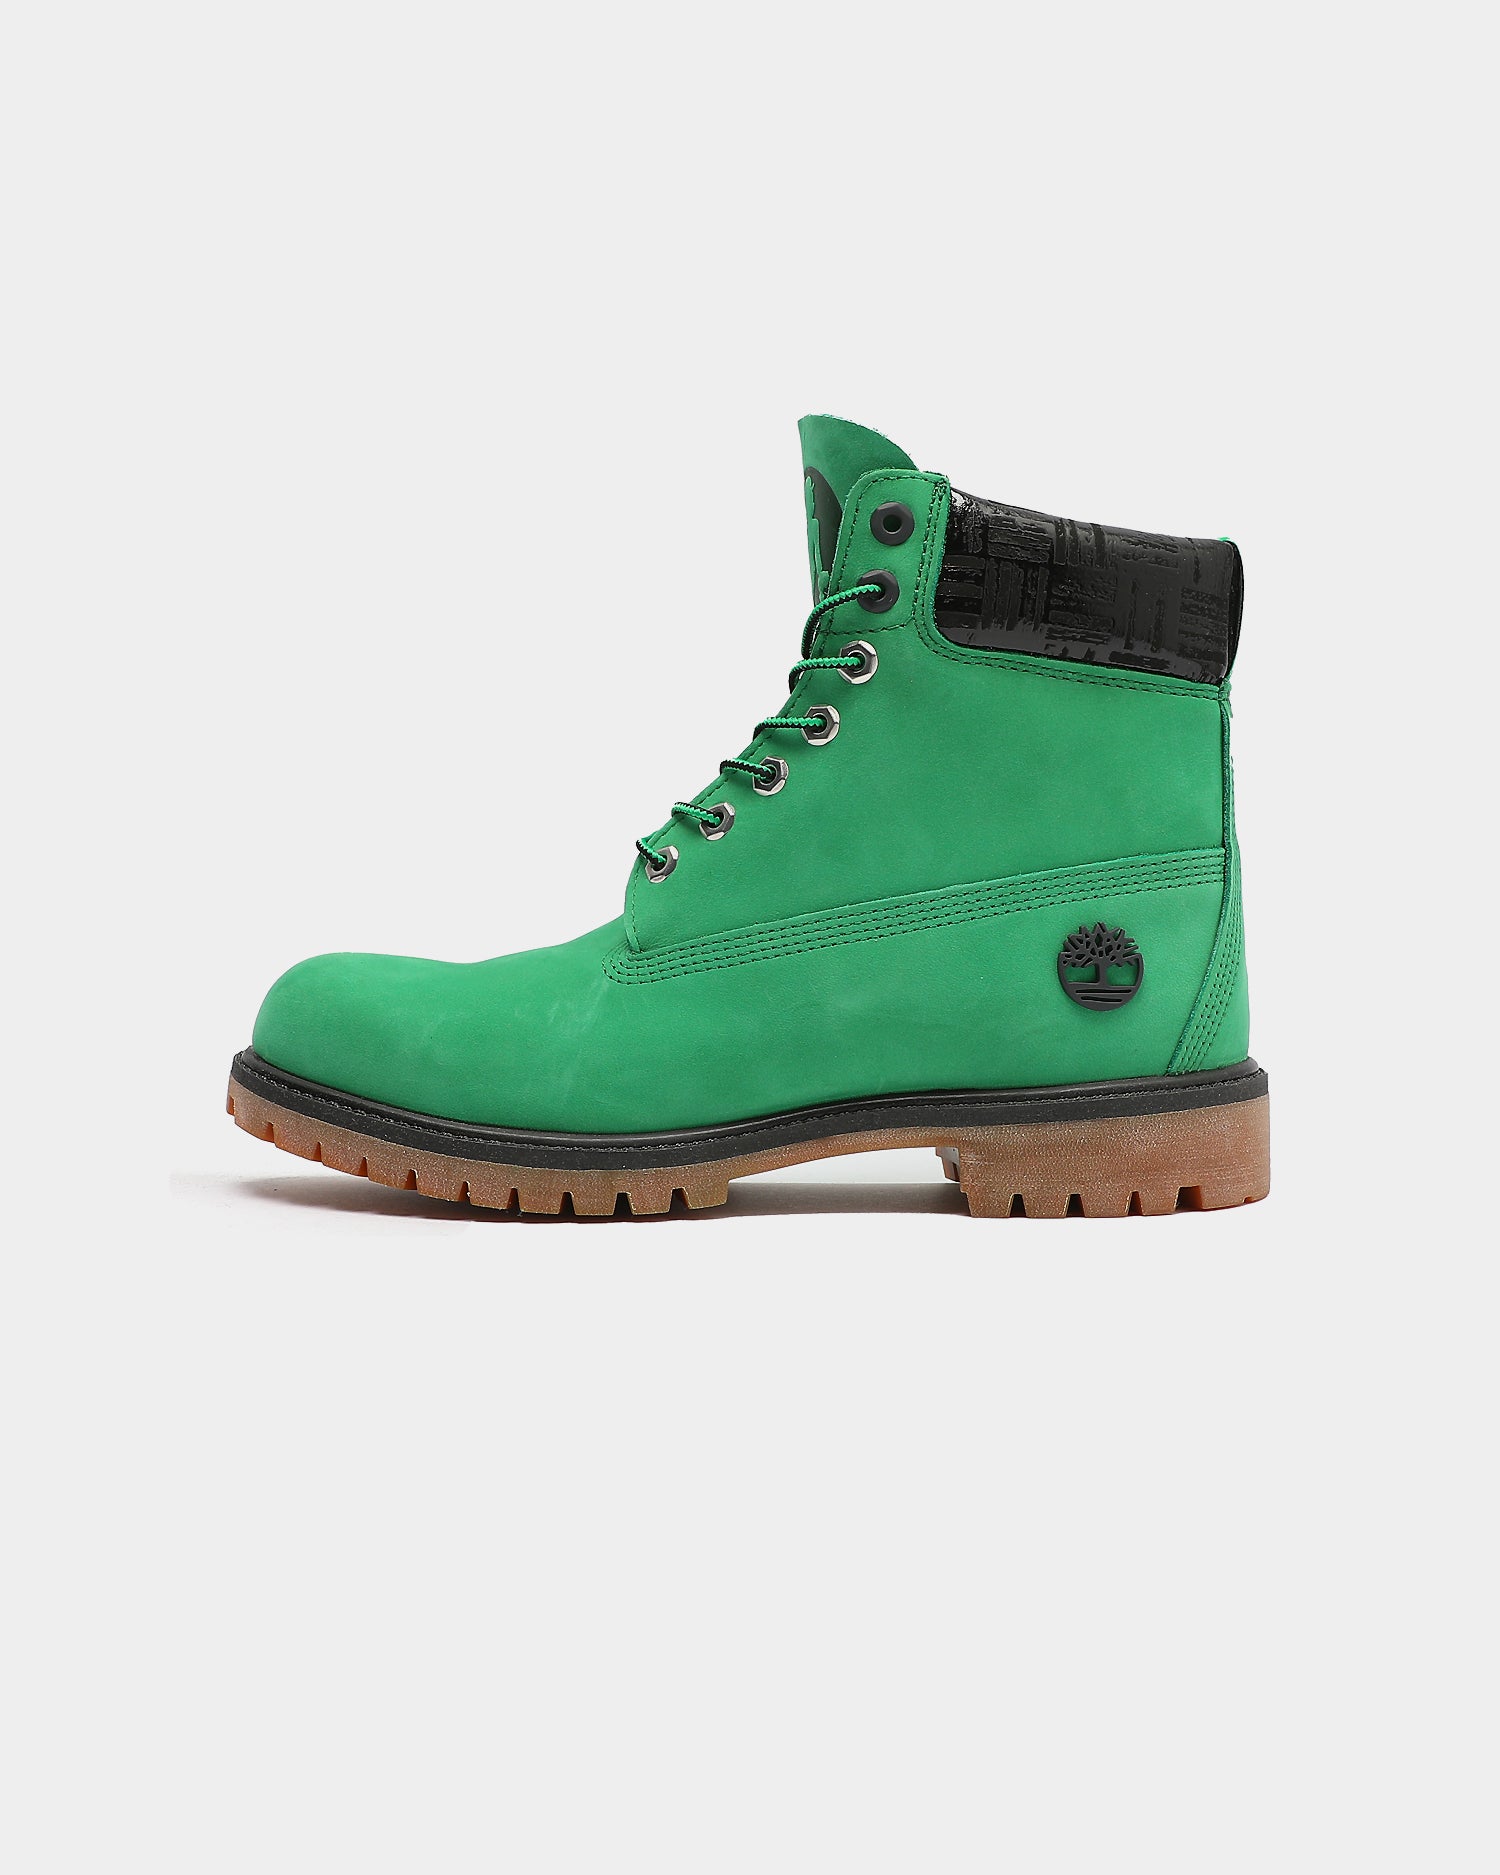 green 6 inch timberland boots